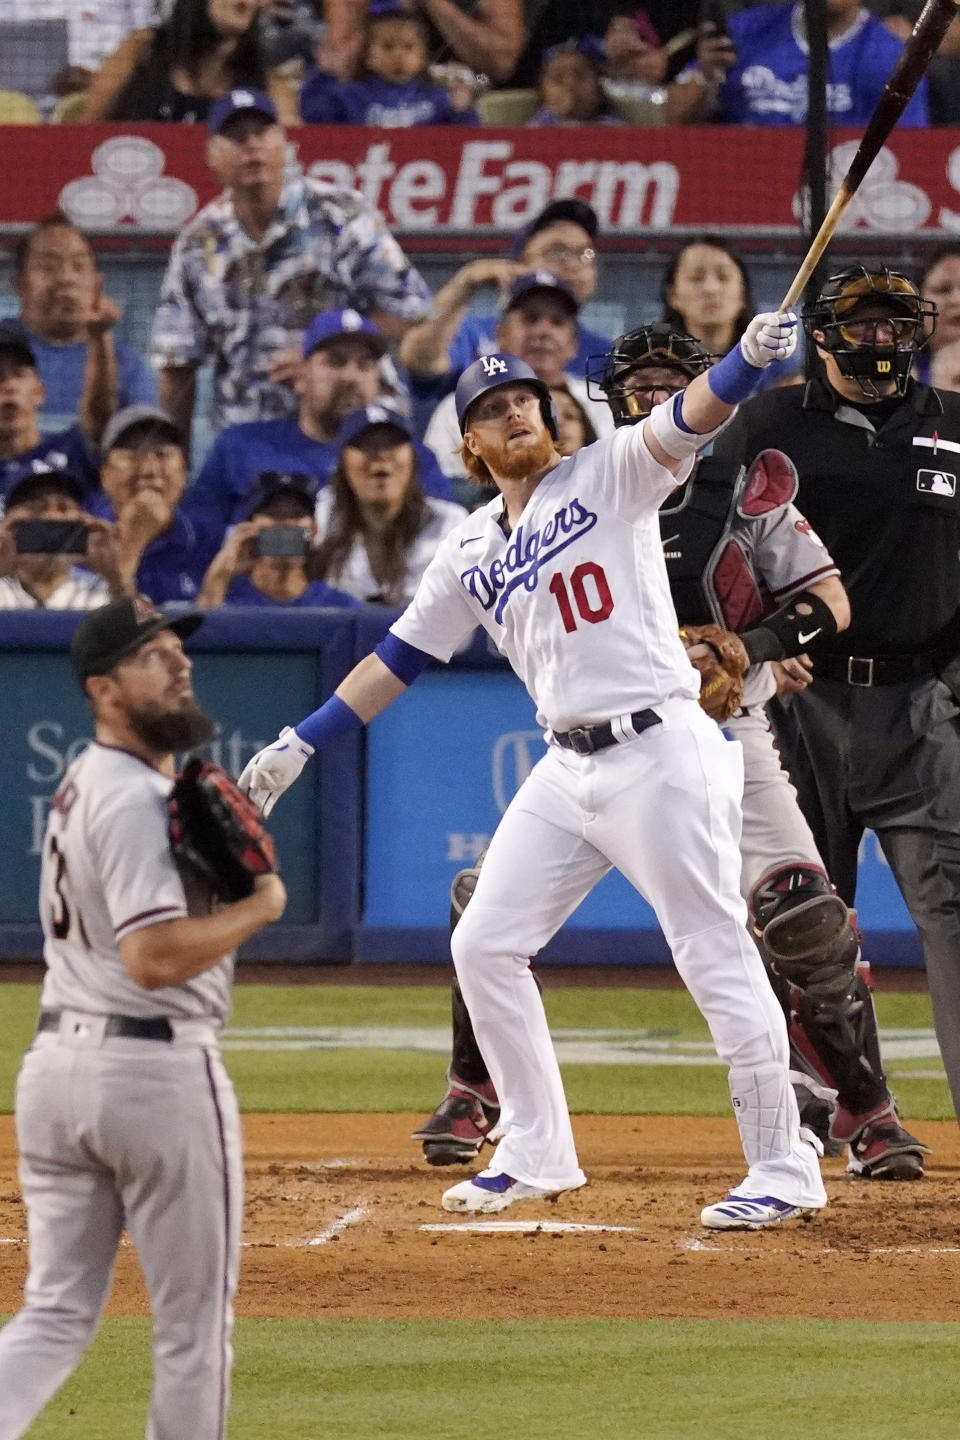 Los Angeles Dodgers' Justin Turner, second from left, hits a grand slam as Arizona Diamondbacks starting pitcher Caleb Smith, left, and catcher Bryan Holaday, second from right, watch along with home plate umpire Tony Randazzo during the second inning of a baseball game Saturday, July 10, 2021, in Los Angeles. (AP Photo/Mark J. Terrill)